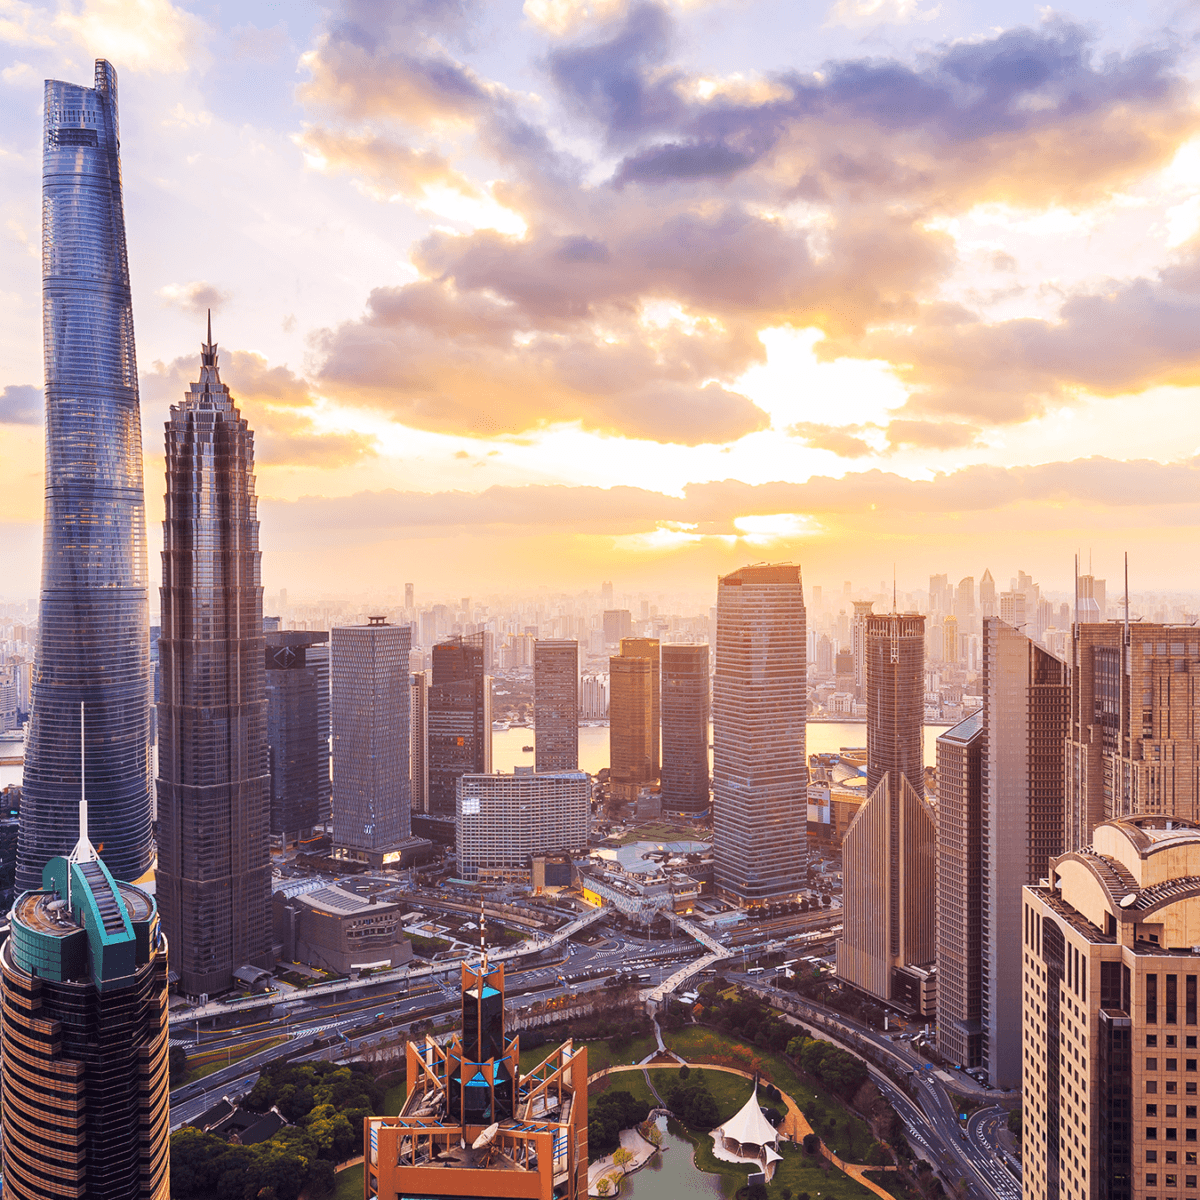 An image of the Shanghai skyline at sunset